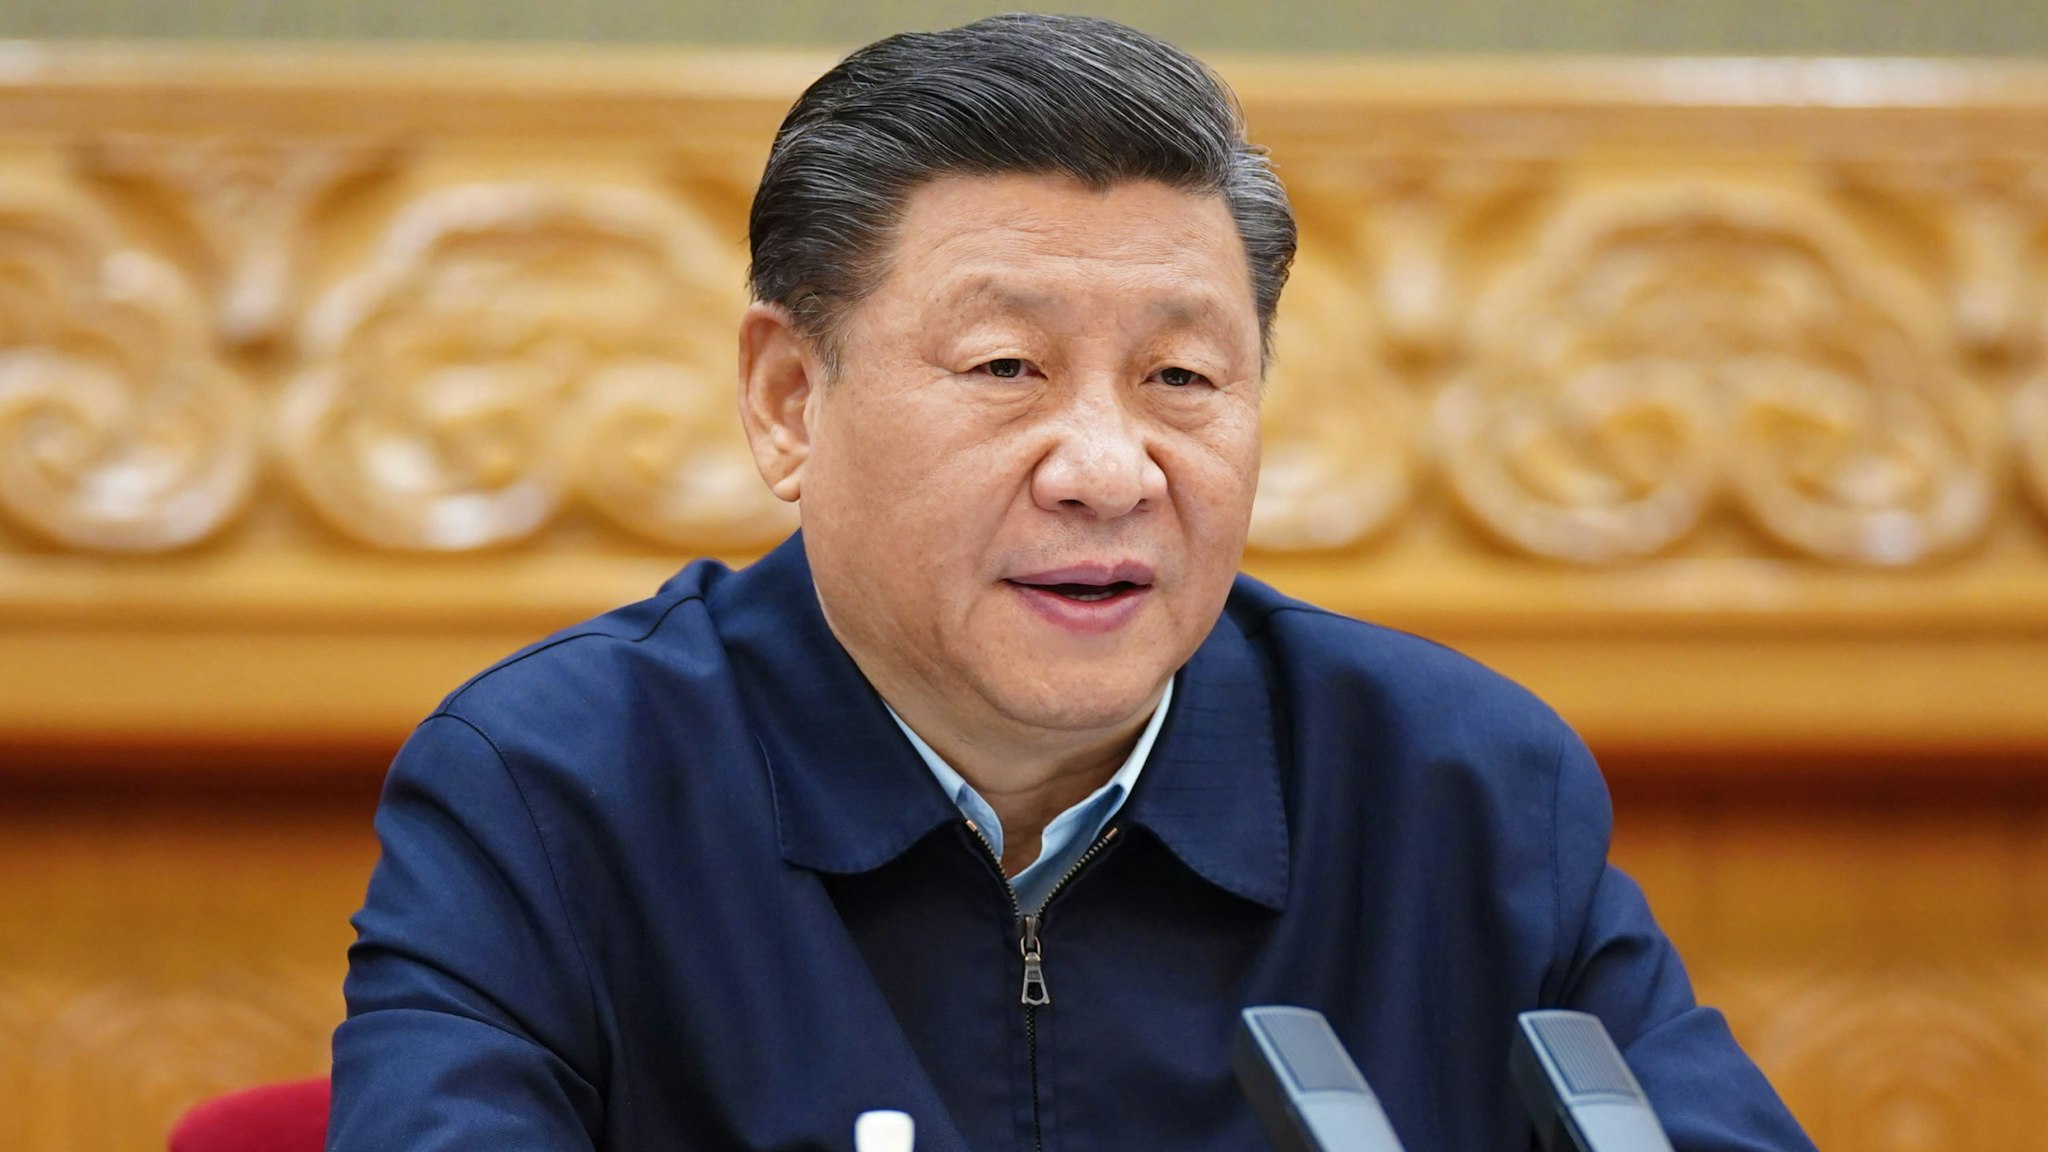 BEIJING, March 6, 2020 -- Chinese President Xi Jinping, also general secretary of the Communist Party of China Central Committee and chairman of the Central Military Commission, delivers an important speech at a symposium on securing a decisive victory in poverty alleviation in Beijing, capital of China, March 6, 2020.